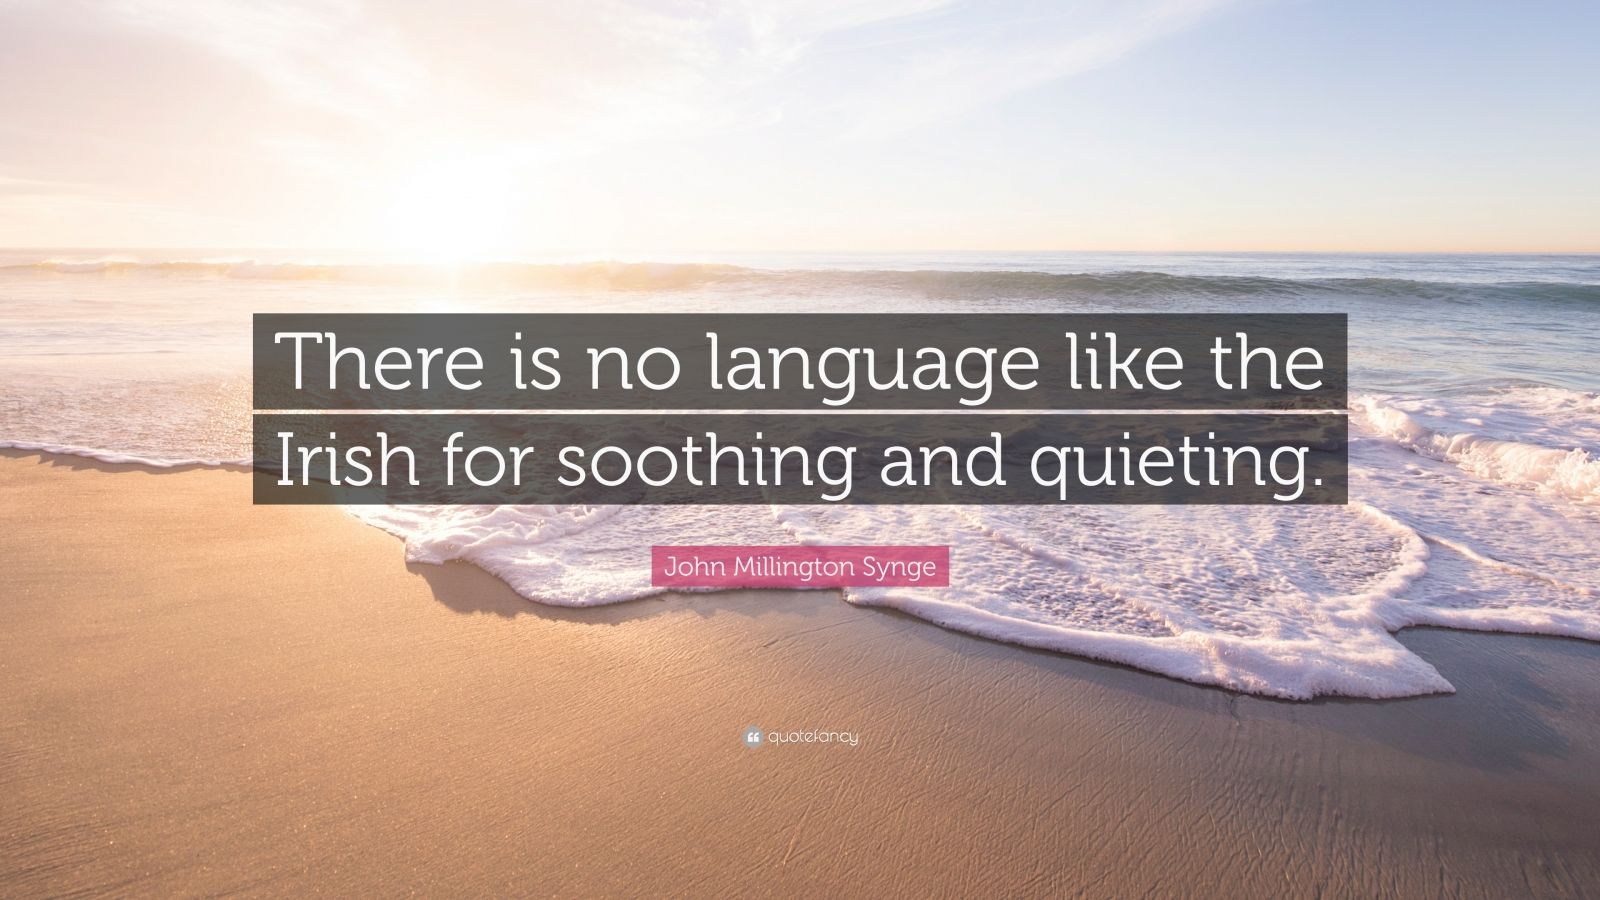 John Millington Synge Quote: “There is no language like the Irish for  soothing and quieting.”